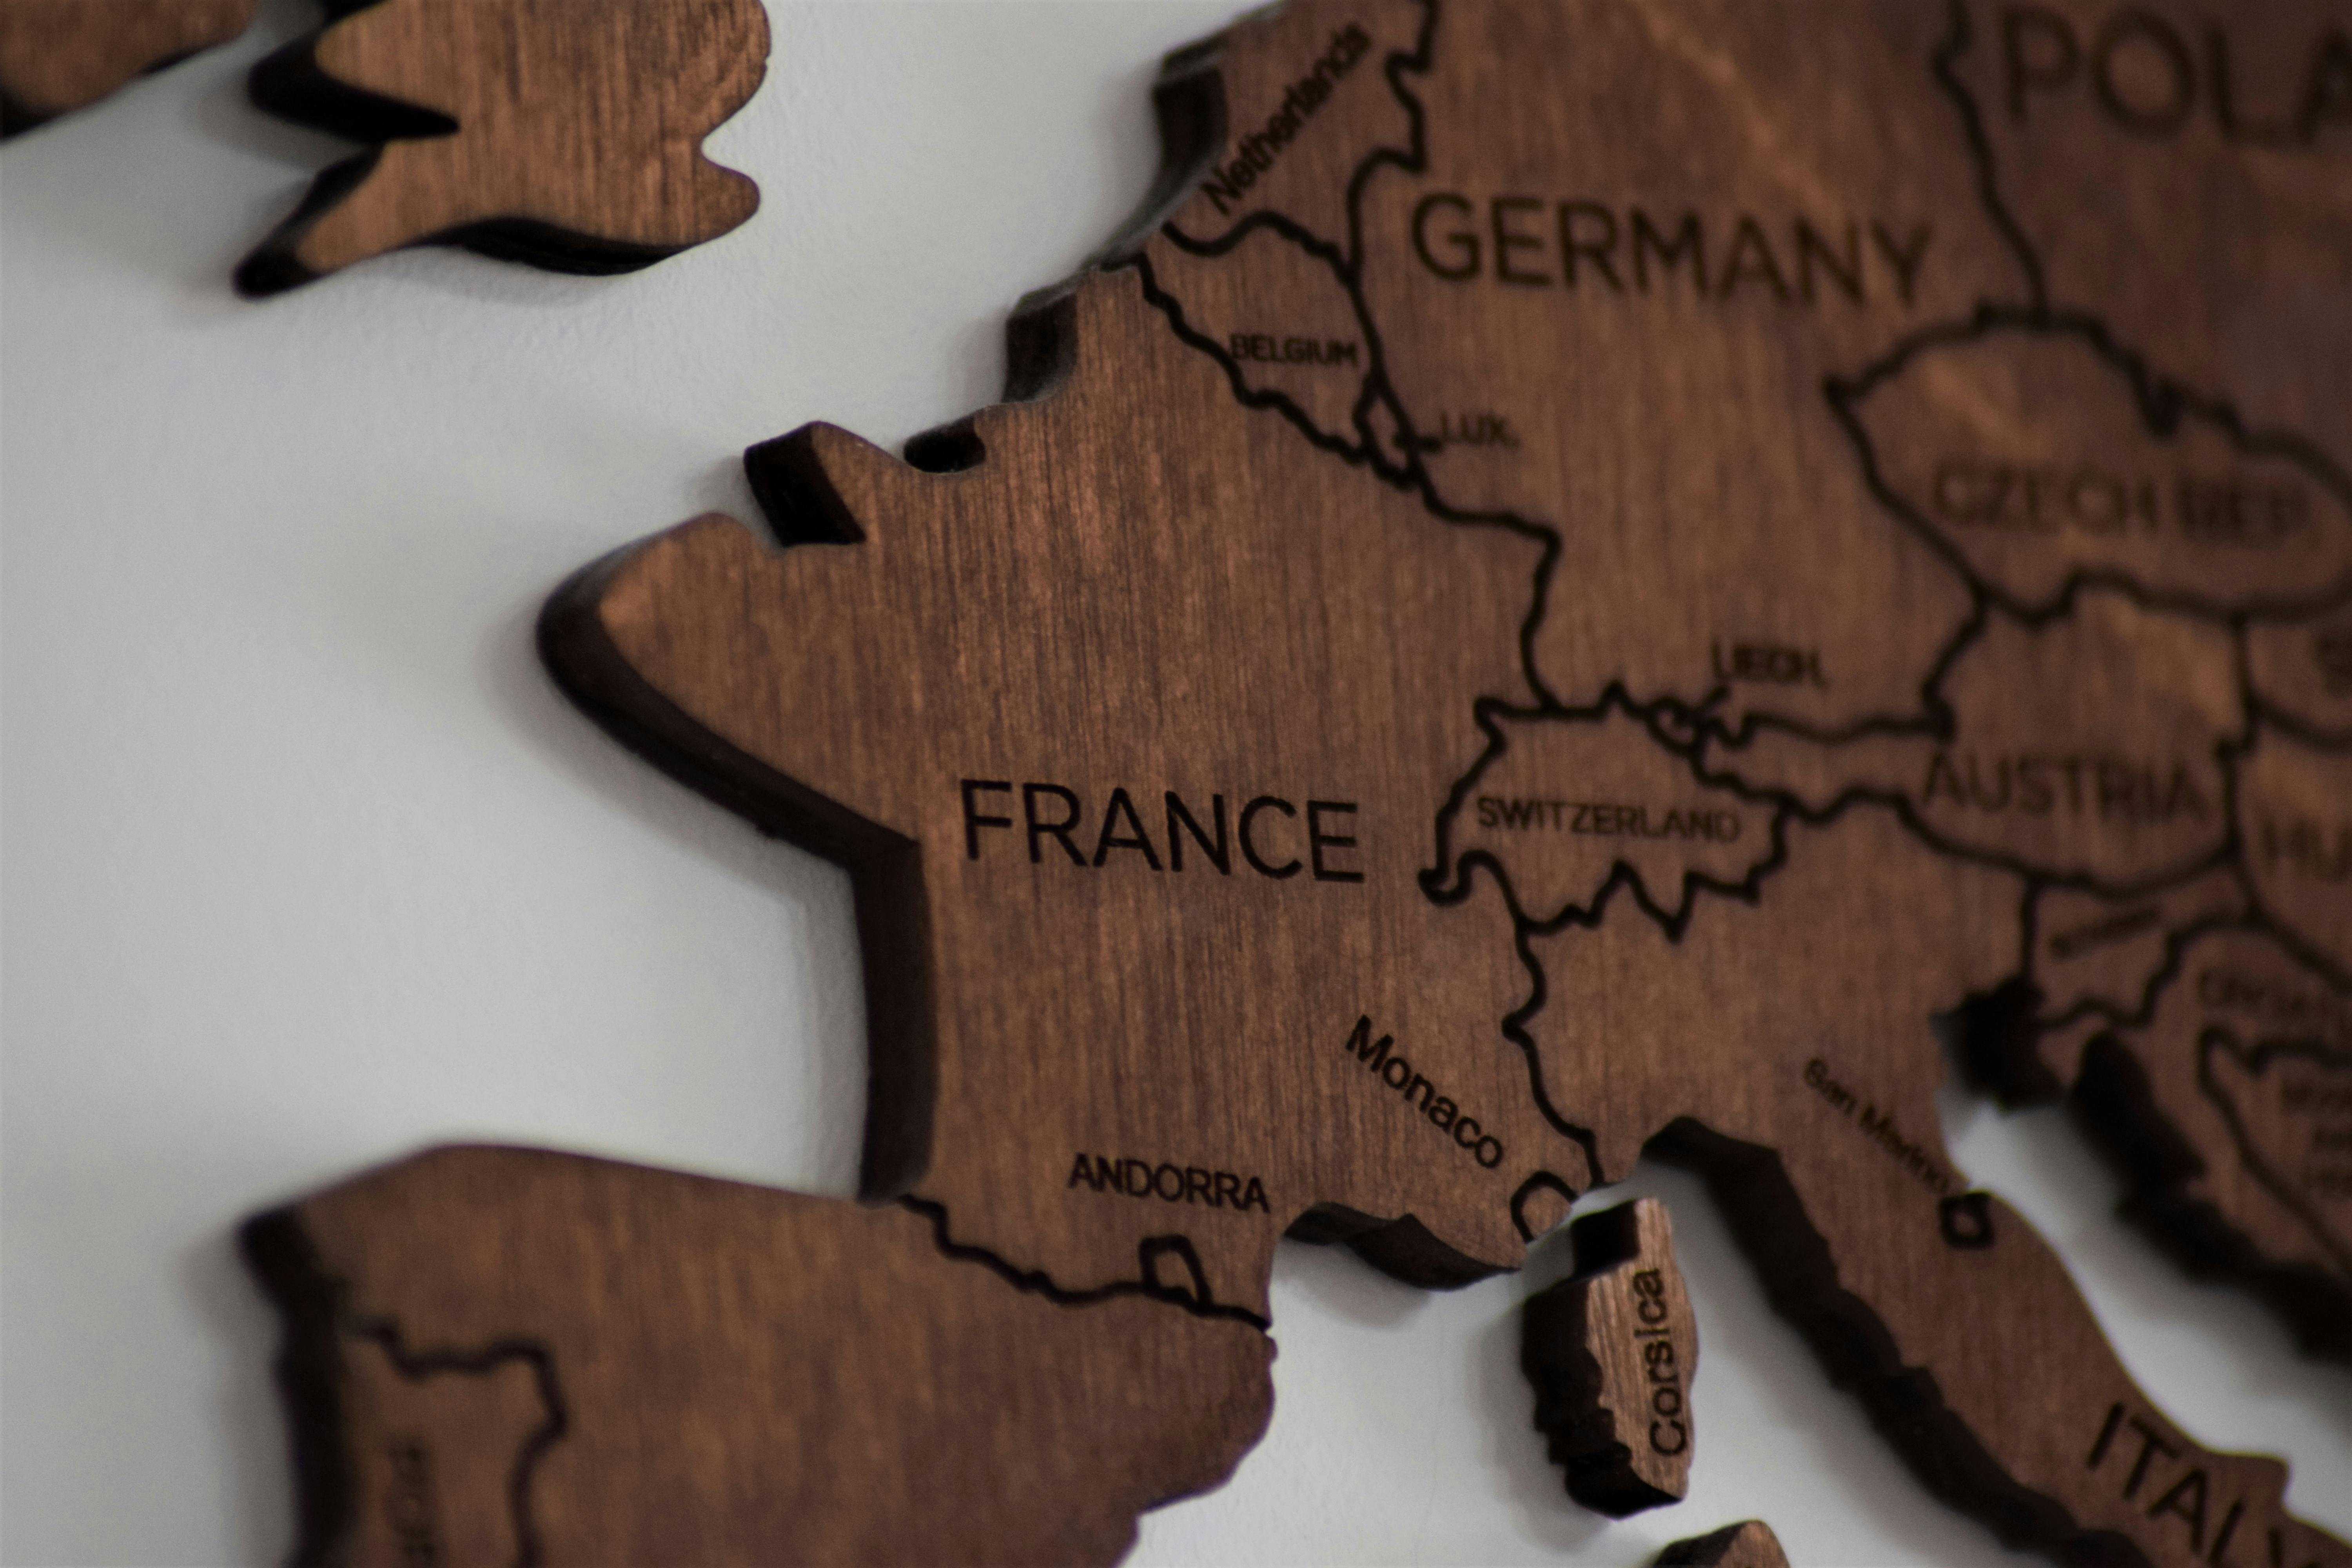 A wooden puzzle of Europe with France featured